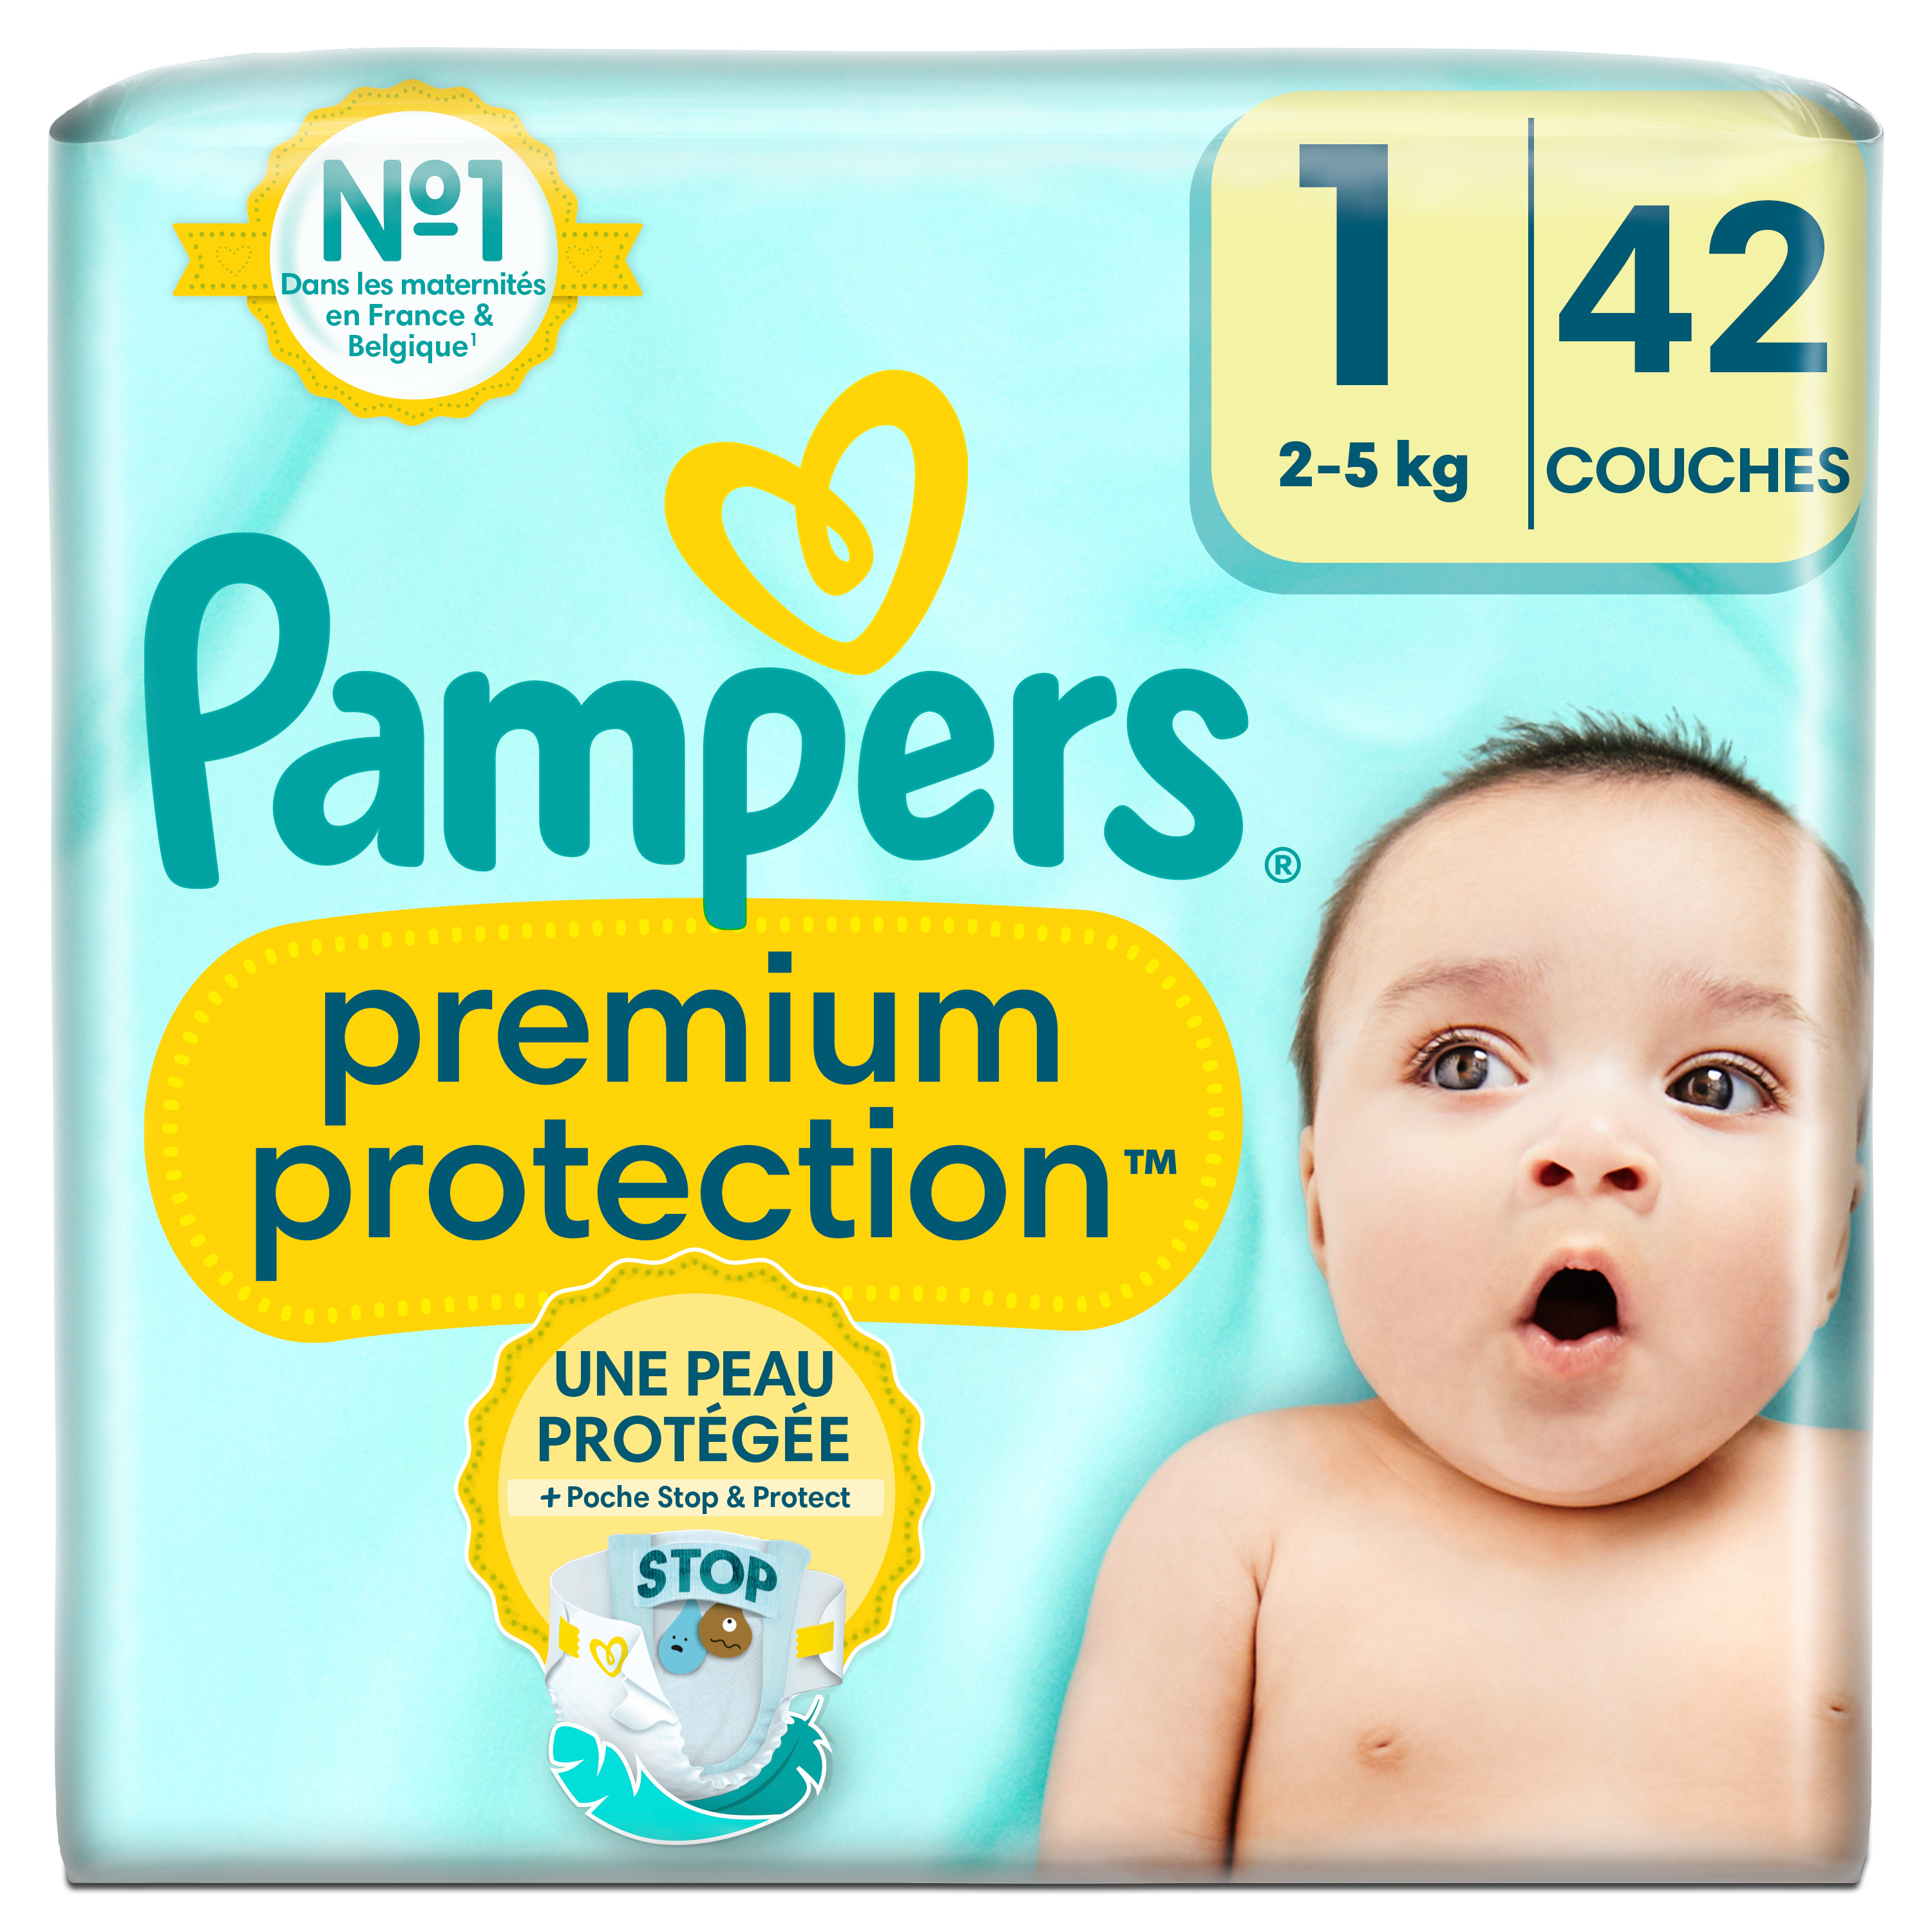 Couches Bébé Pampers Harmonie Taille 1, 2-5kg, 24 Couches